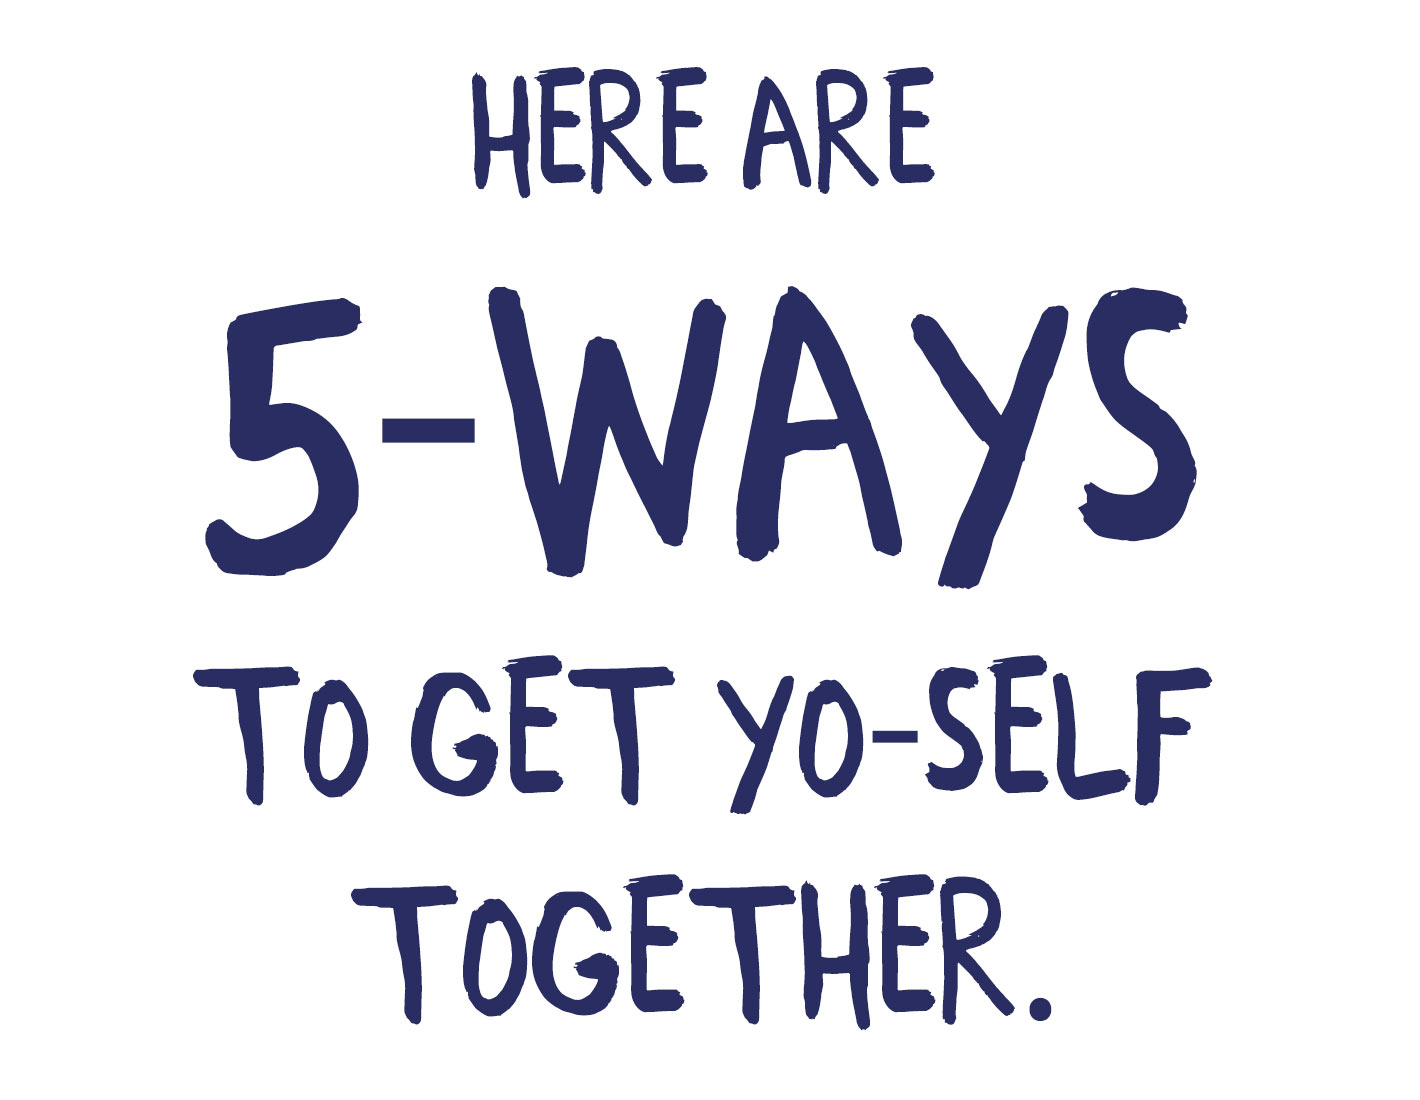 Here are 5 Ways to get Yourself Together